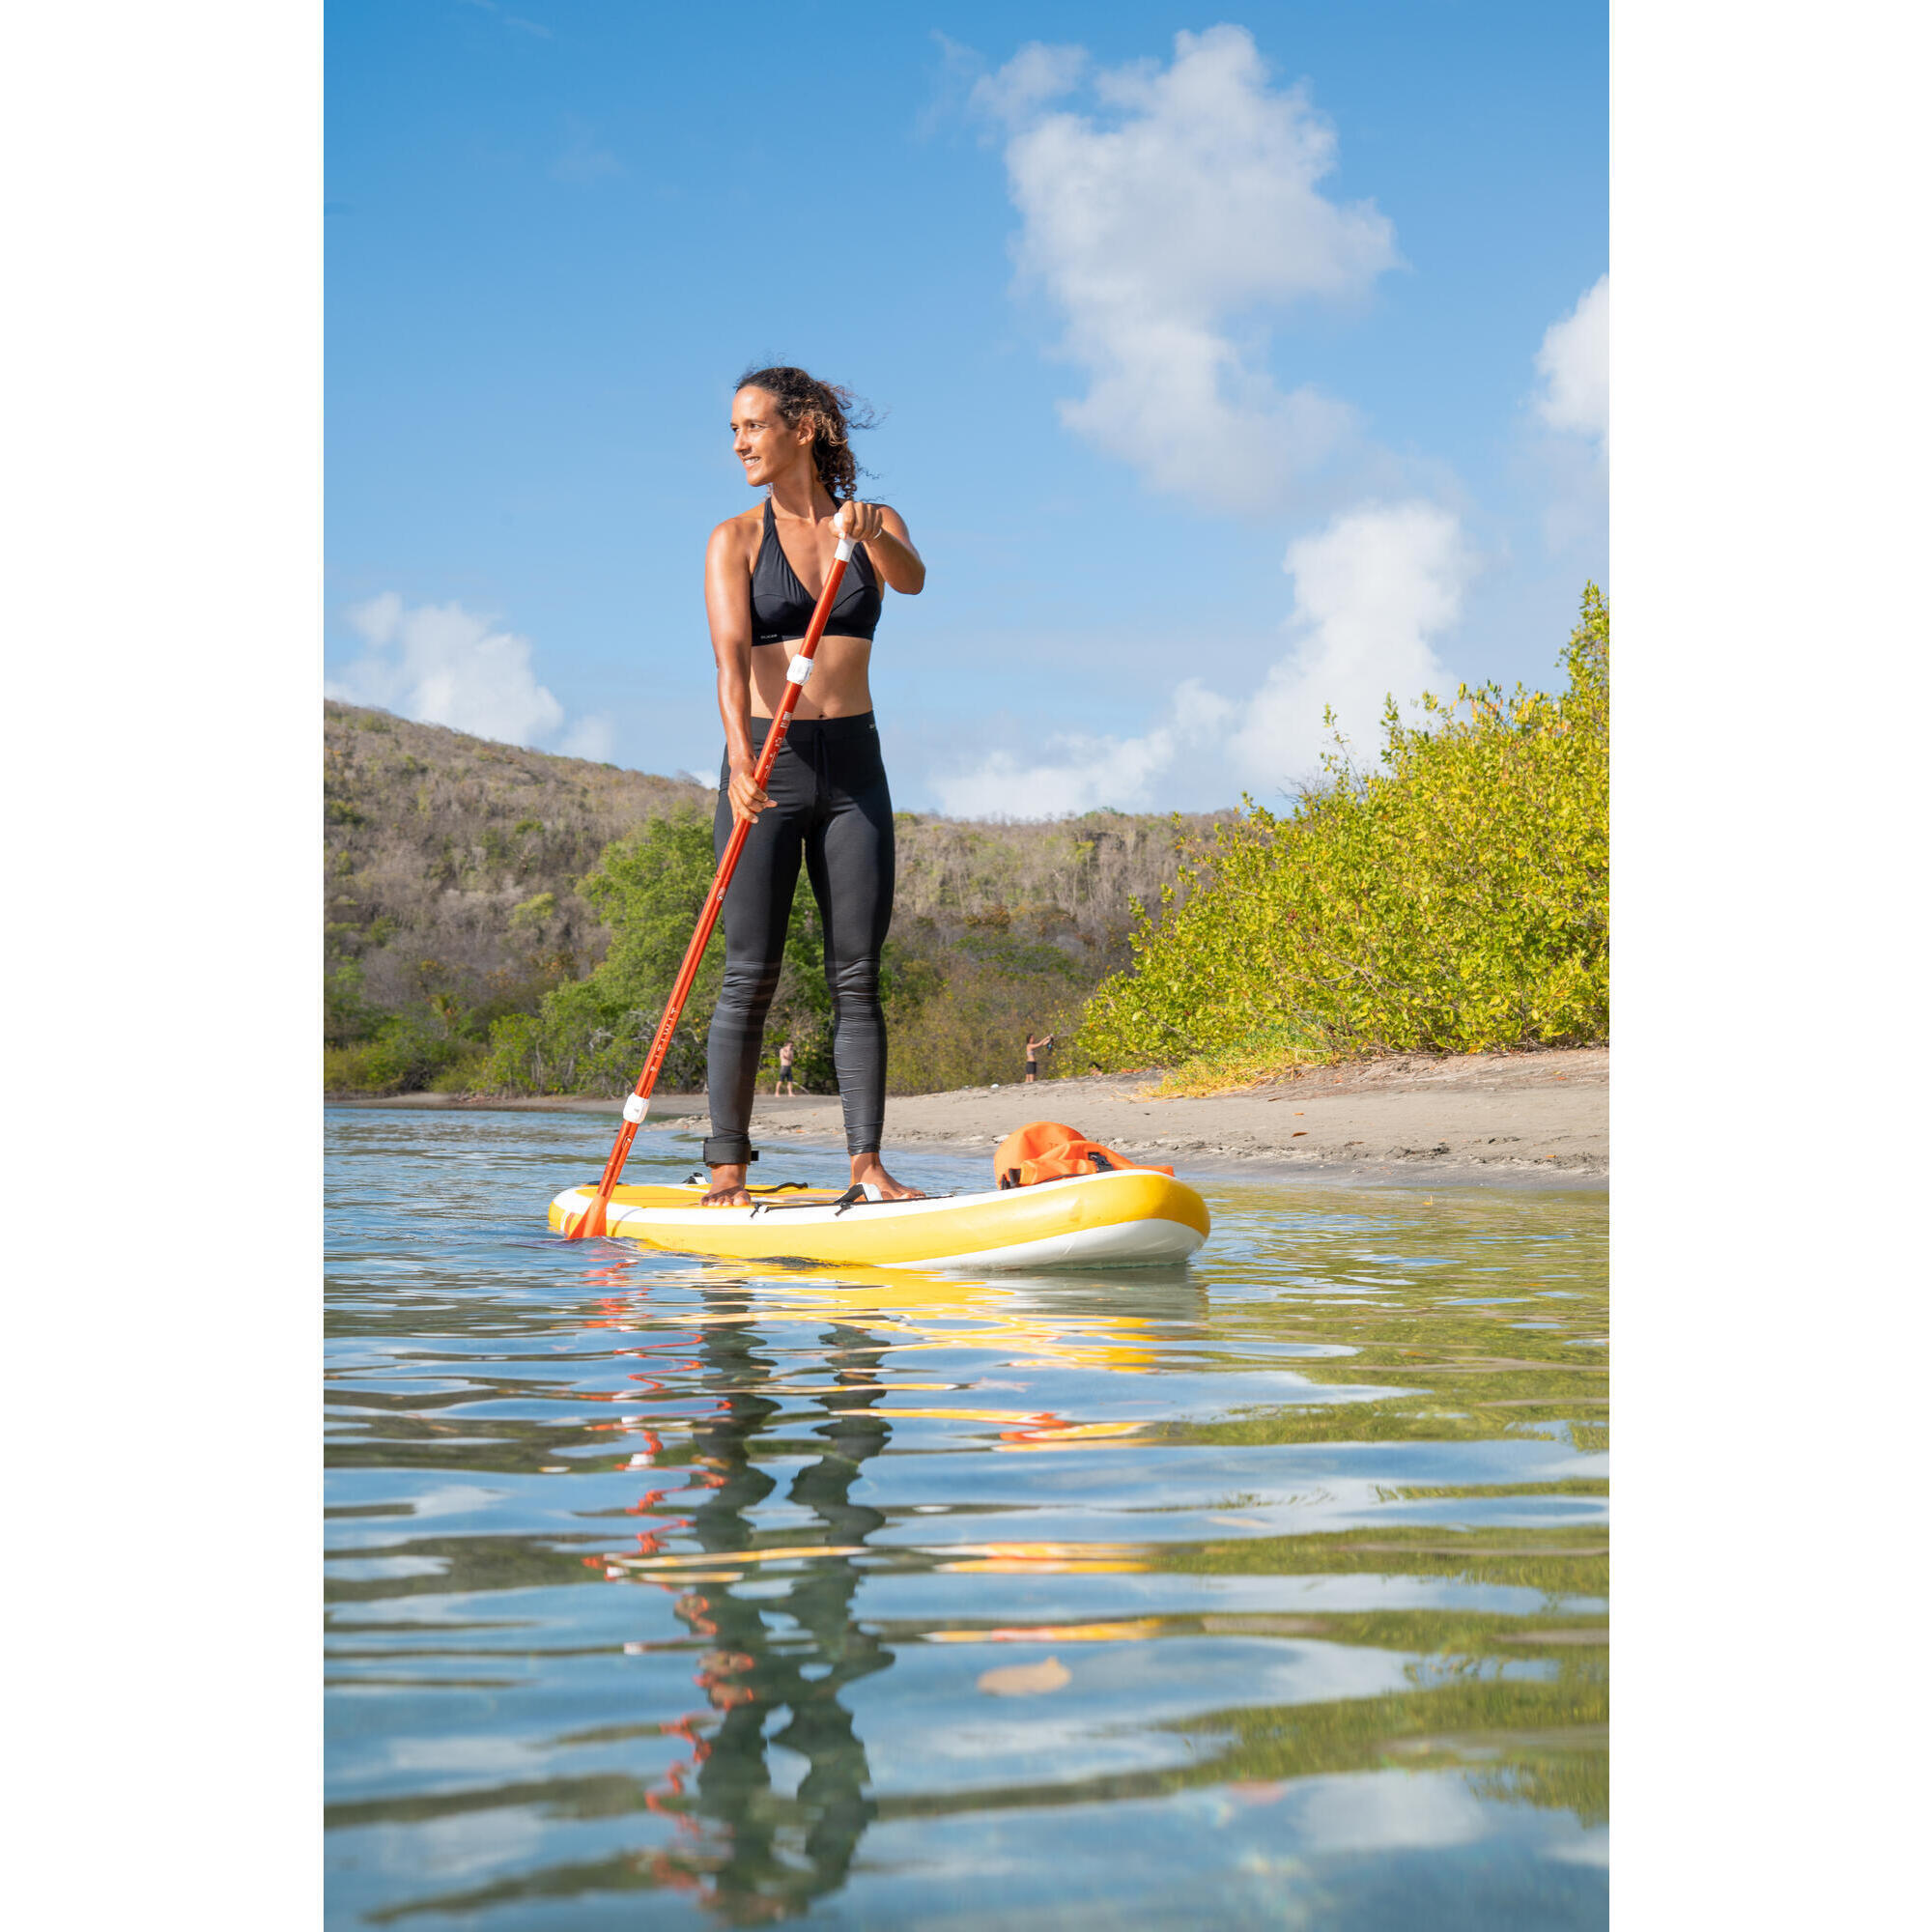 100 COMPACT 8FT (S) INFLATABLE STAND-UP PADDLEBOARD - YELLOW/WHITE (up to 60kg) 2/29